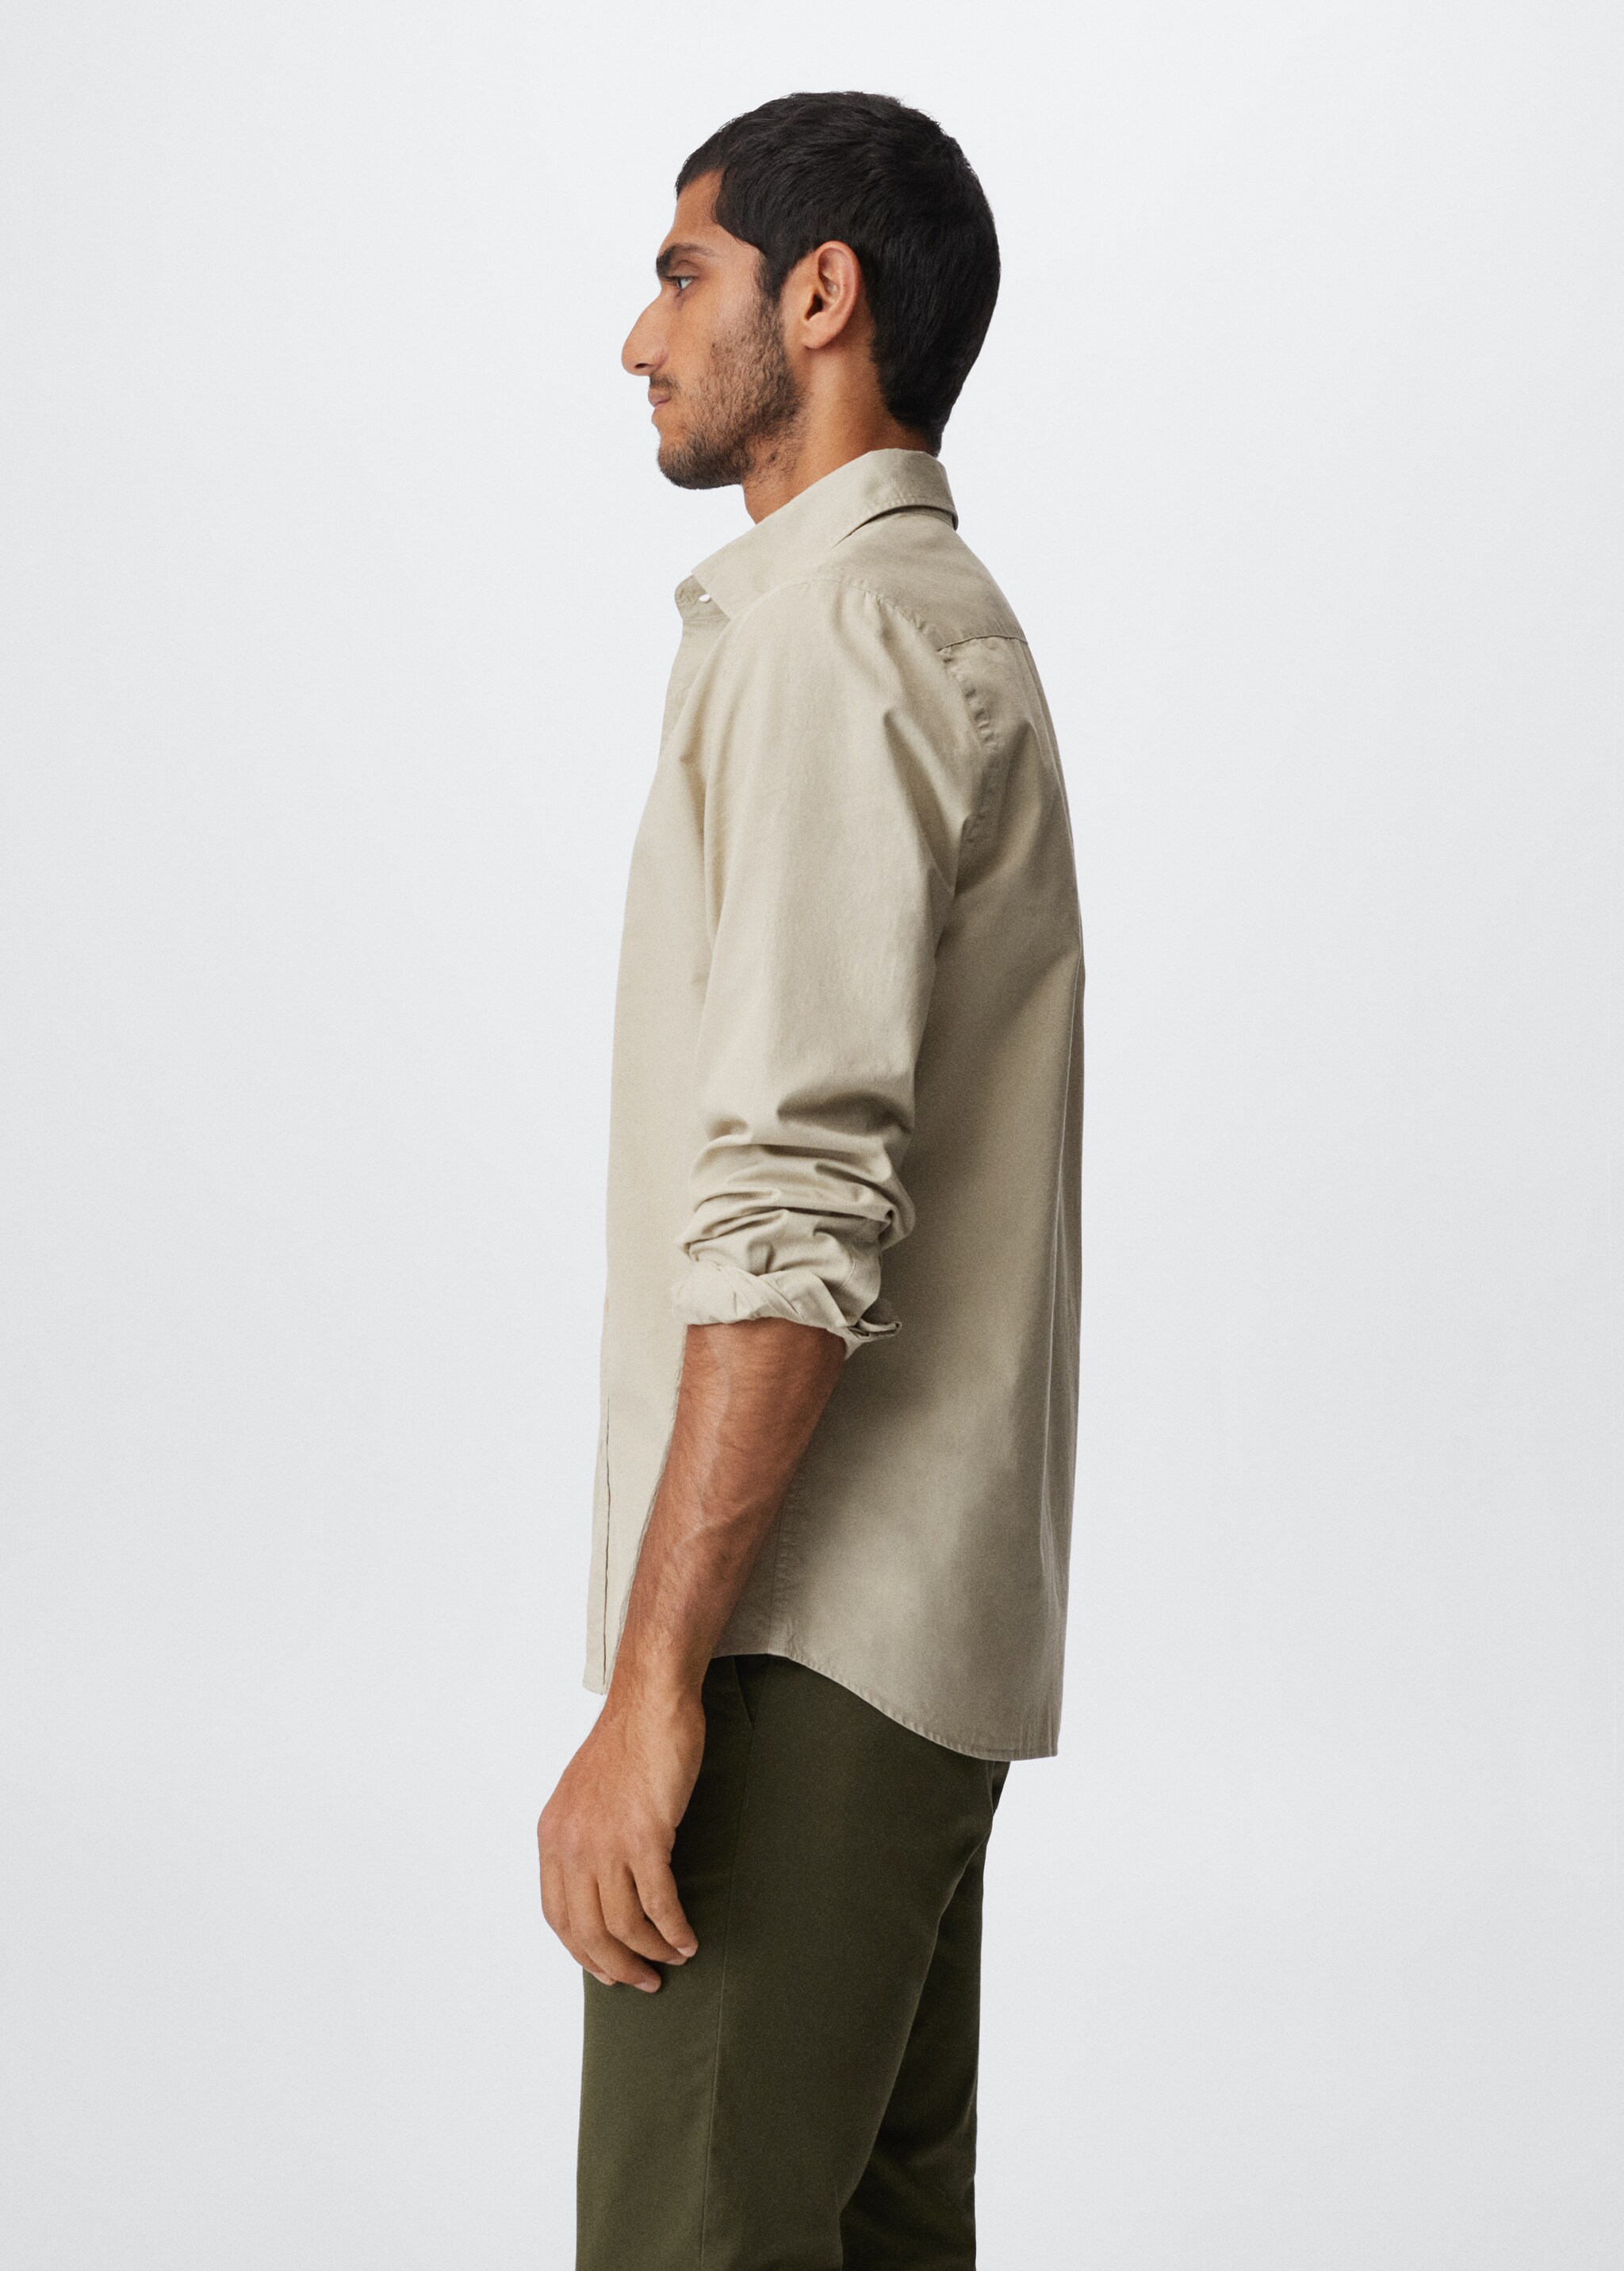 Slim fit cotton shirt - Details of the article 2